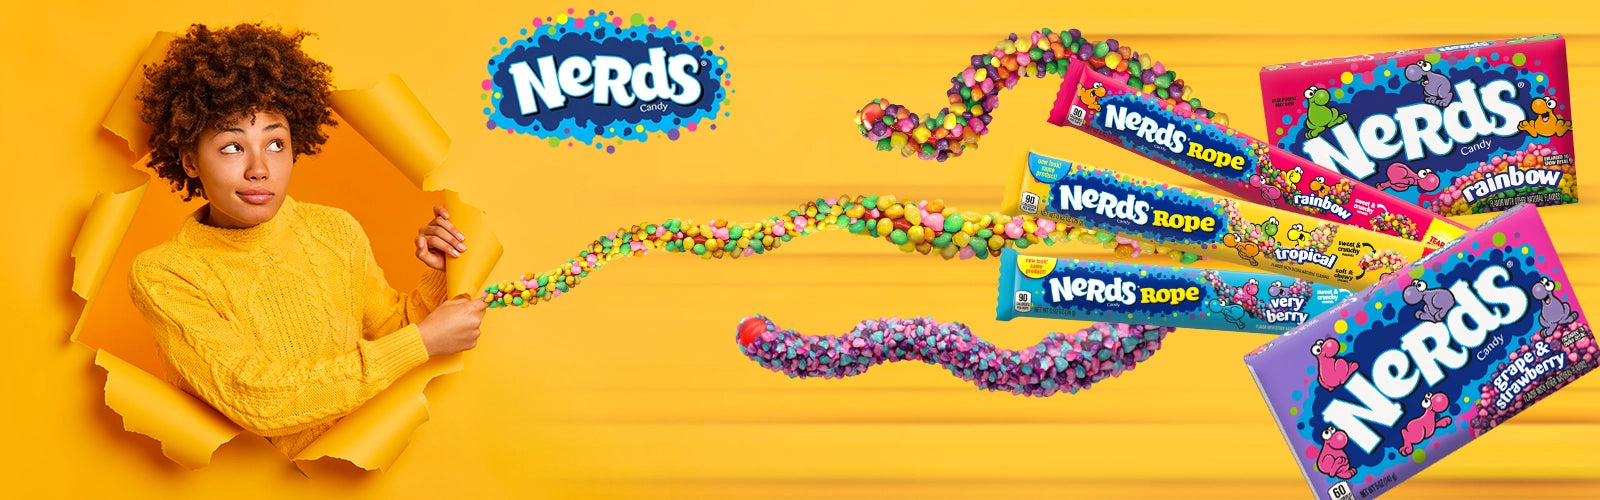 nerds in collection Banner